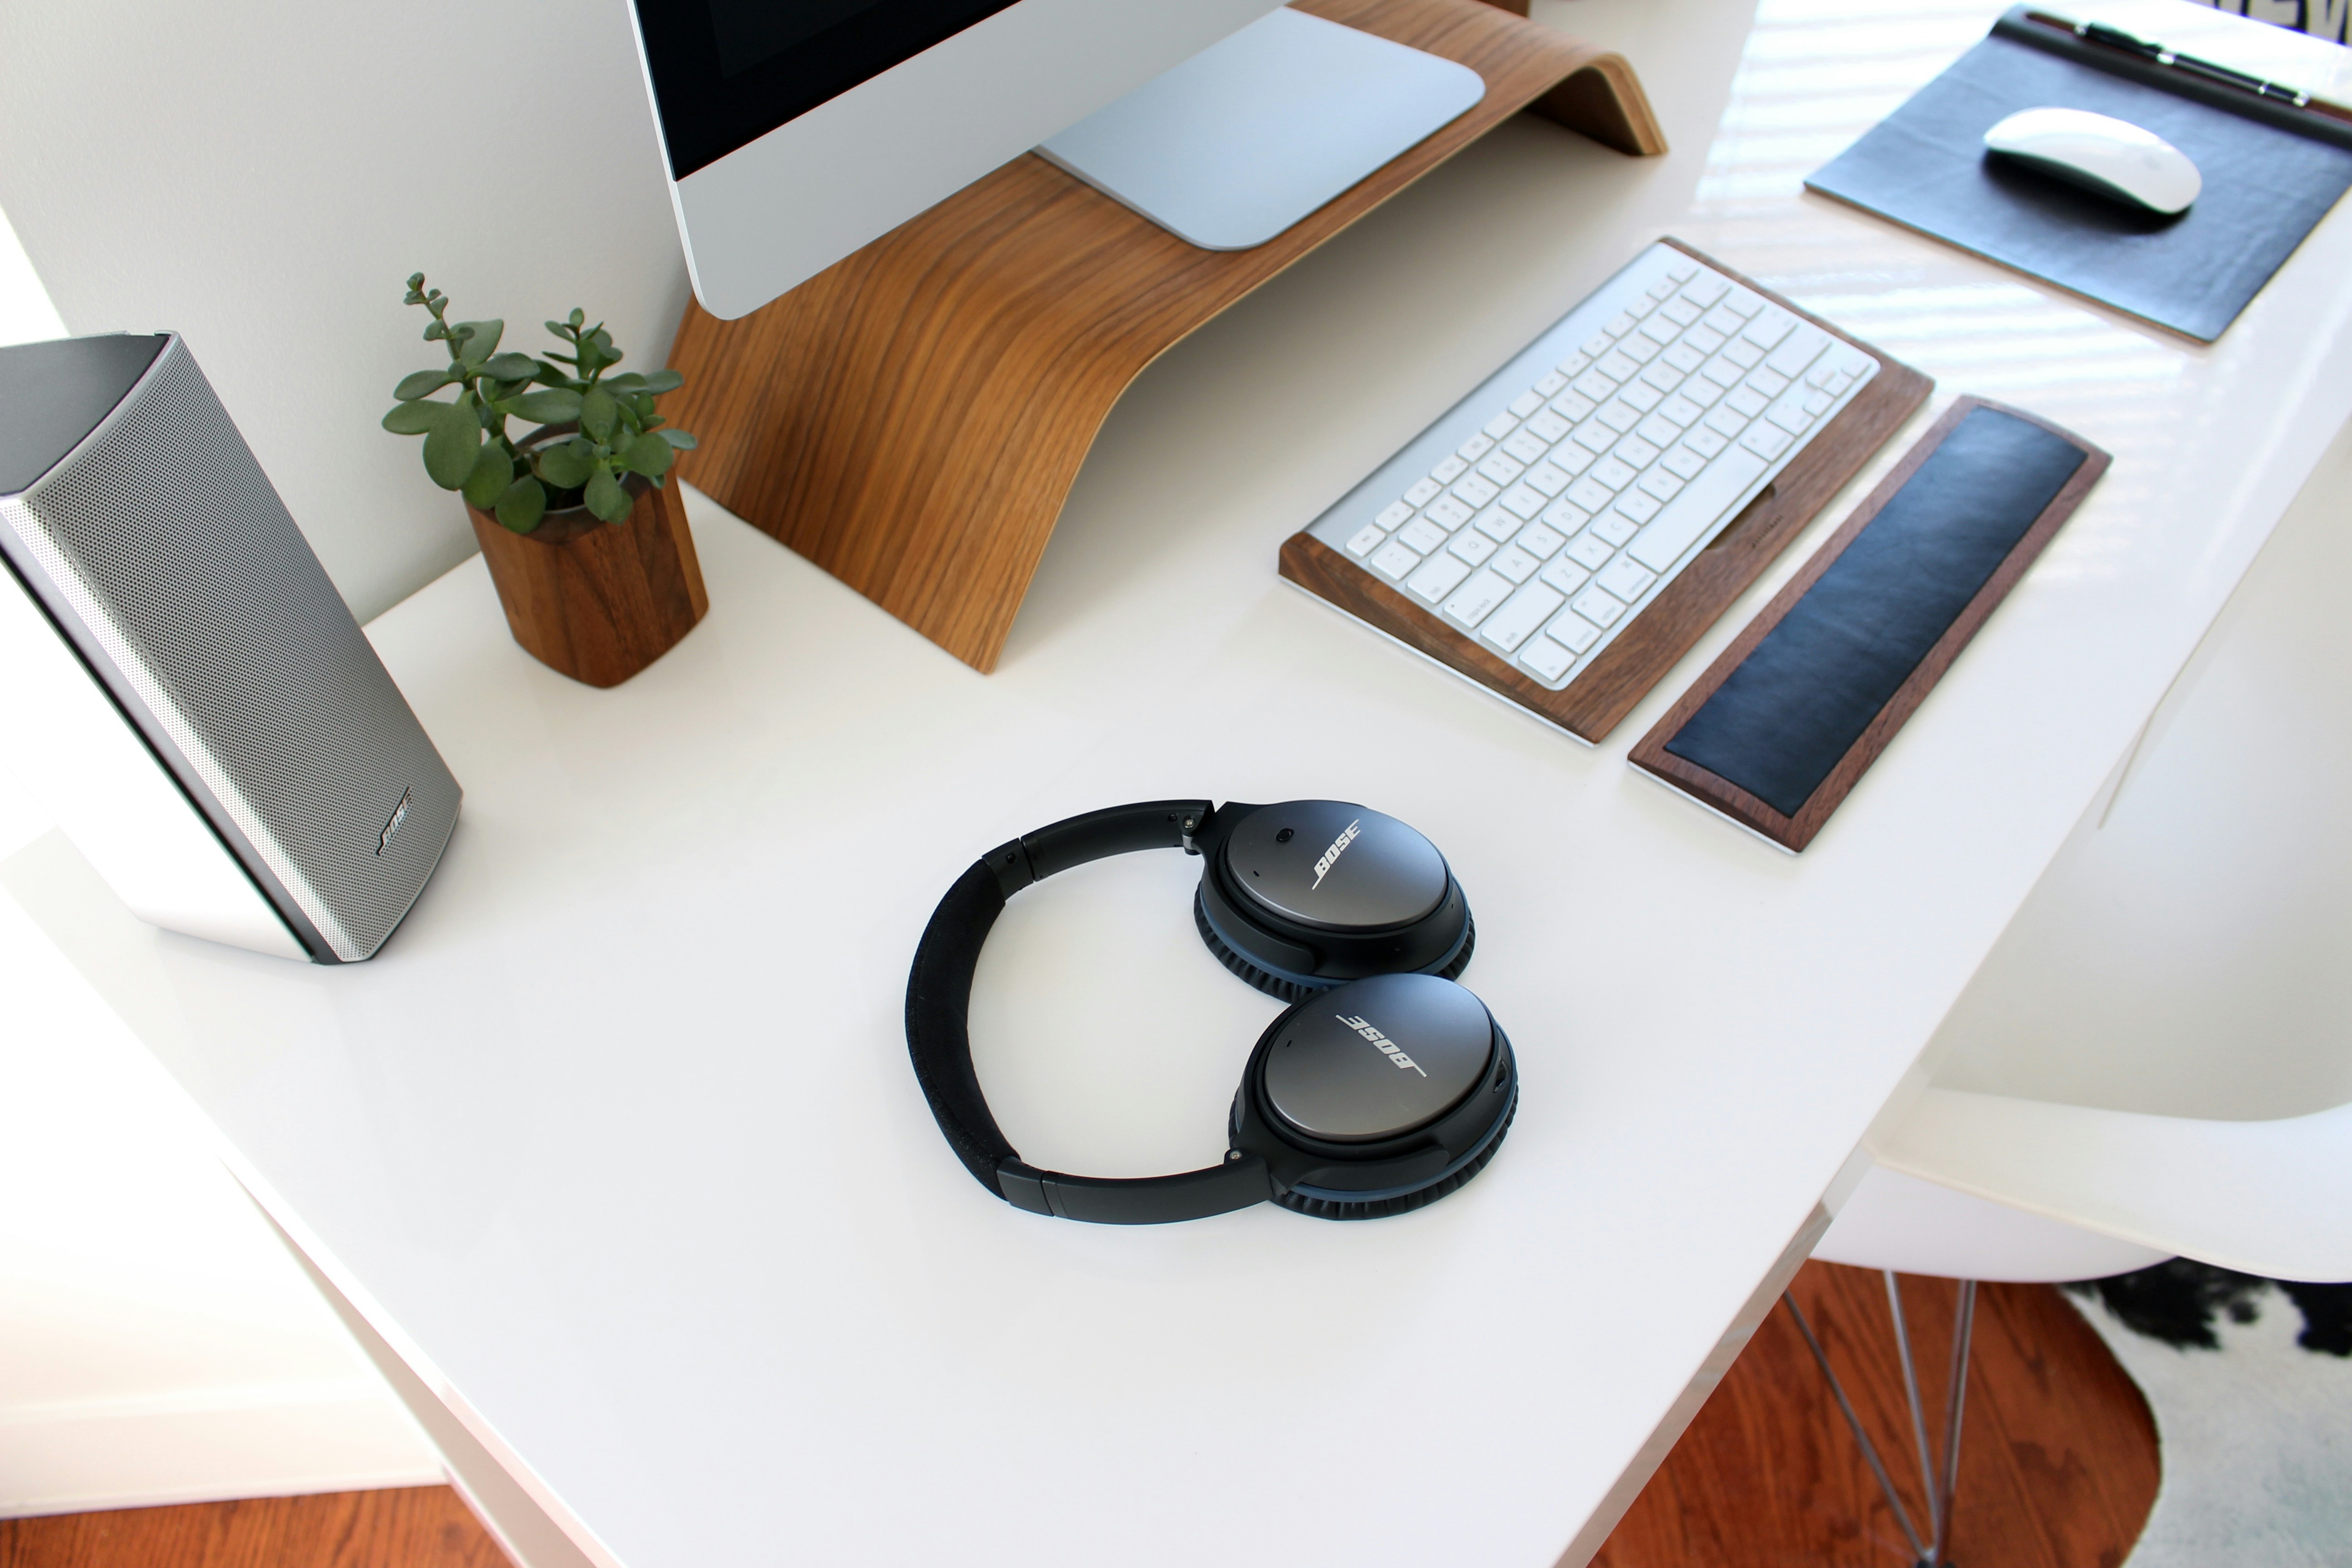 A desk with headphones, a keyboard and wrist wrest, monitor, mouse, speakers and a plant.